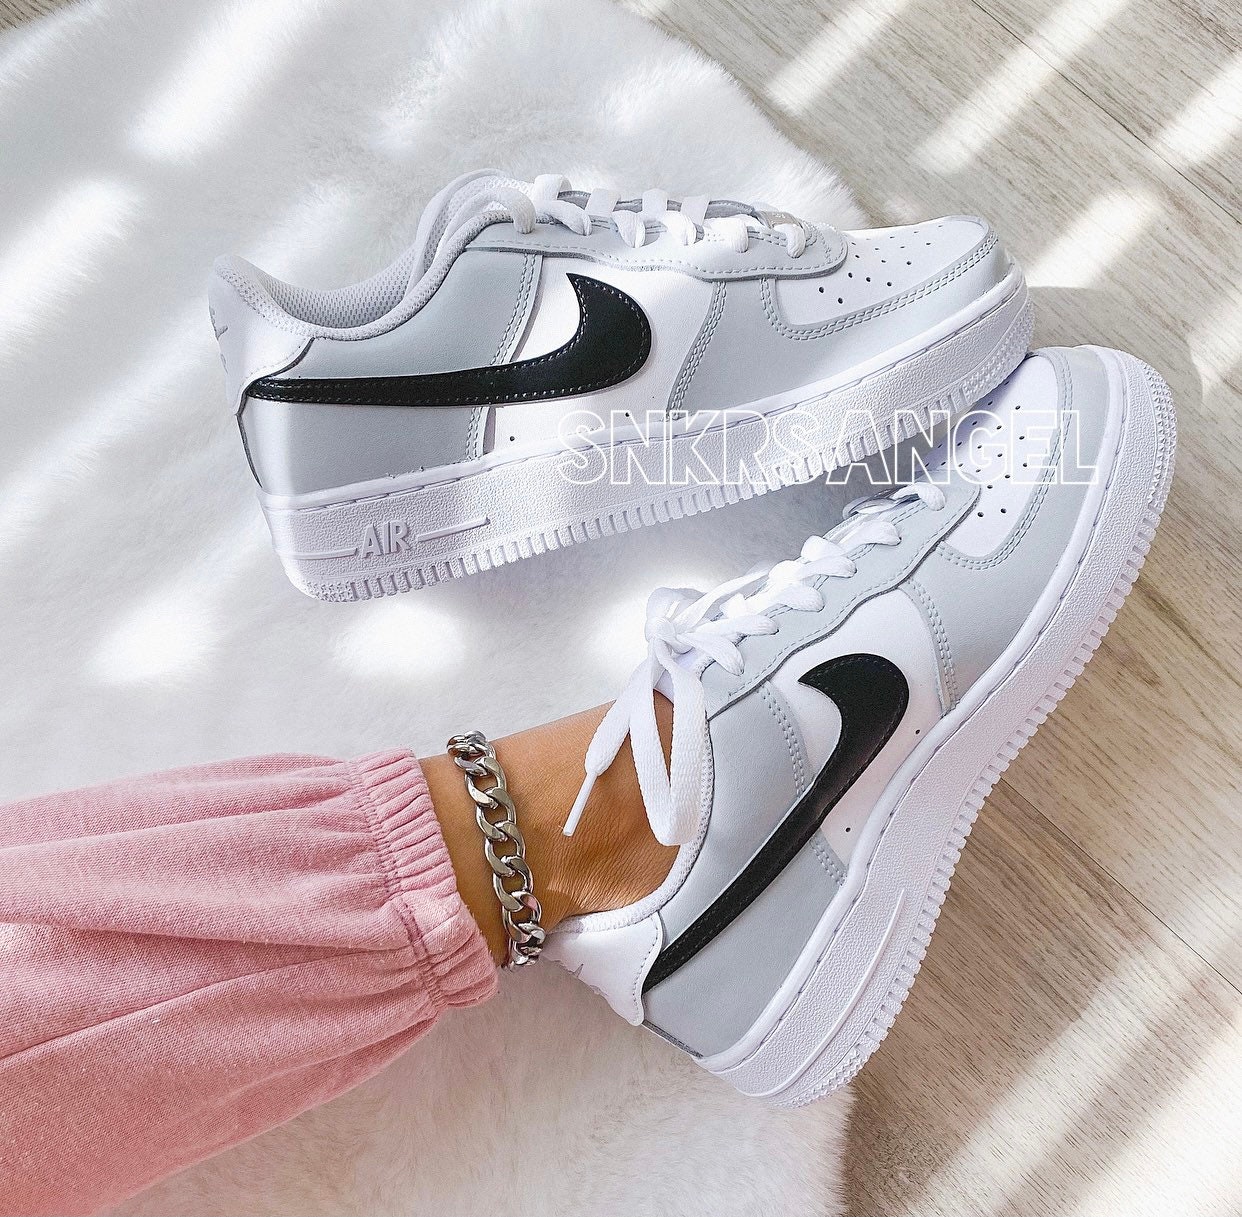 DOUBLE PINK AIR FORCE 1 by customsneaks, Nike shoes air force, Air force  one shoes, Air force shoes